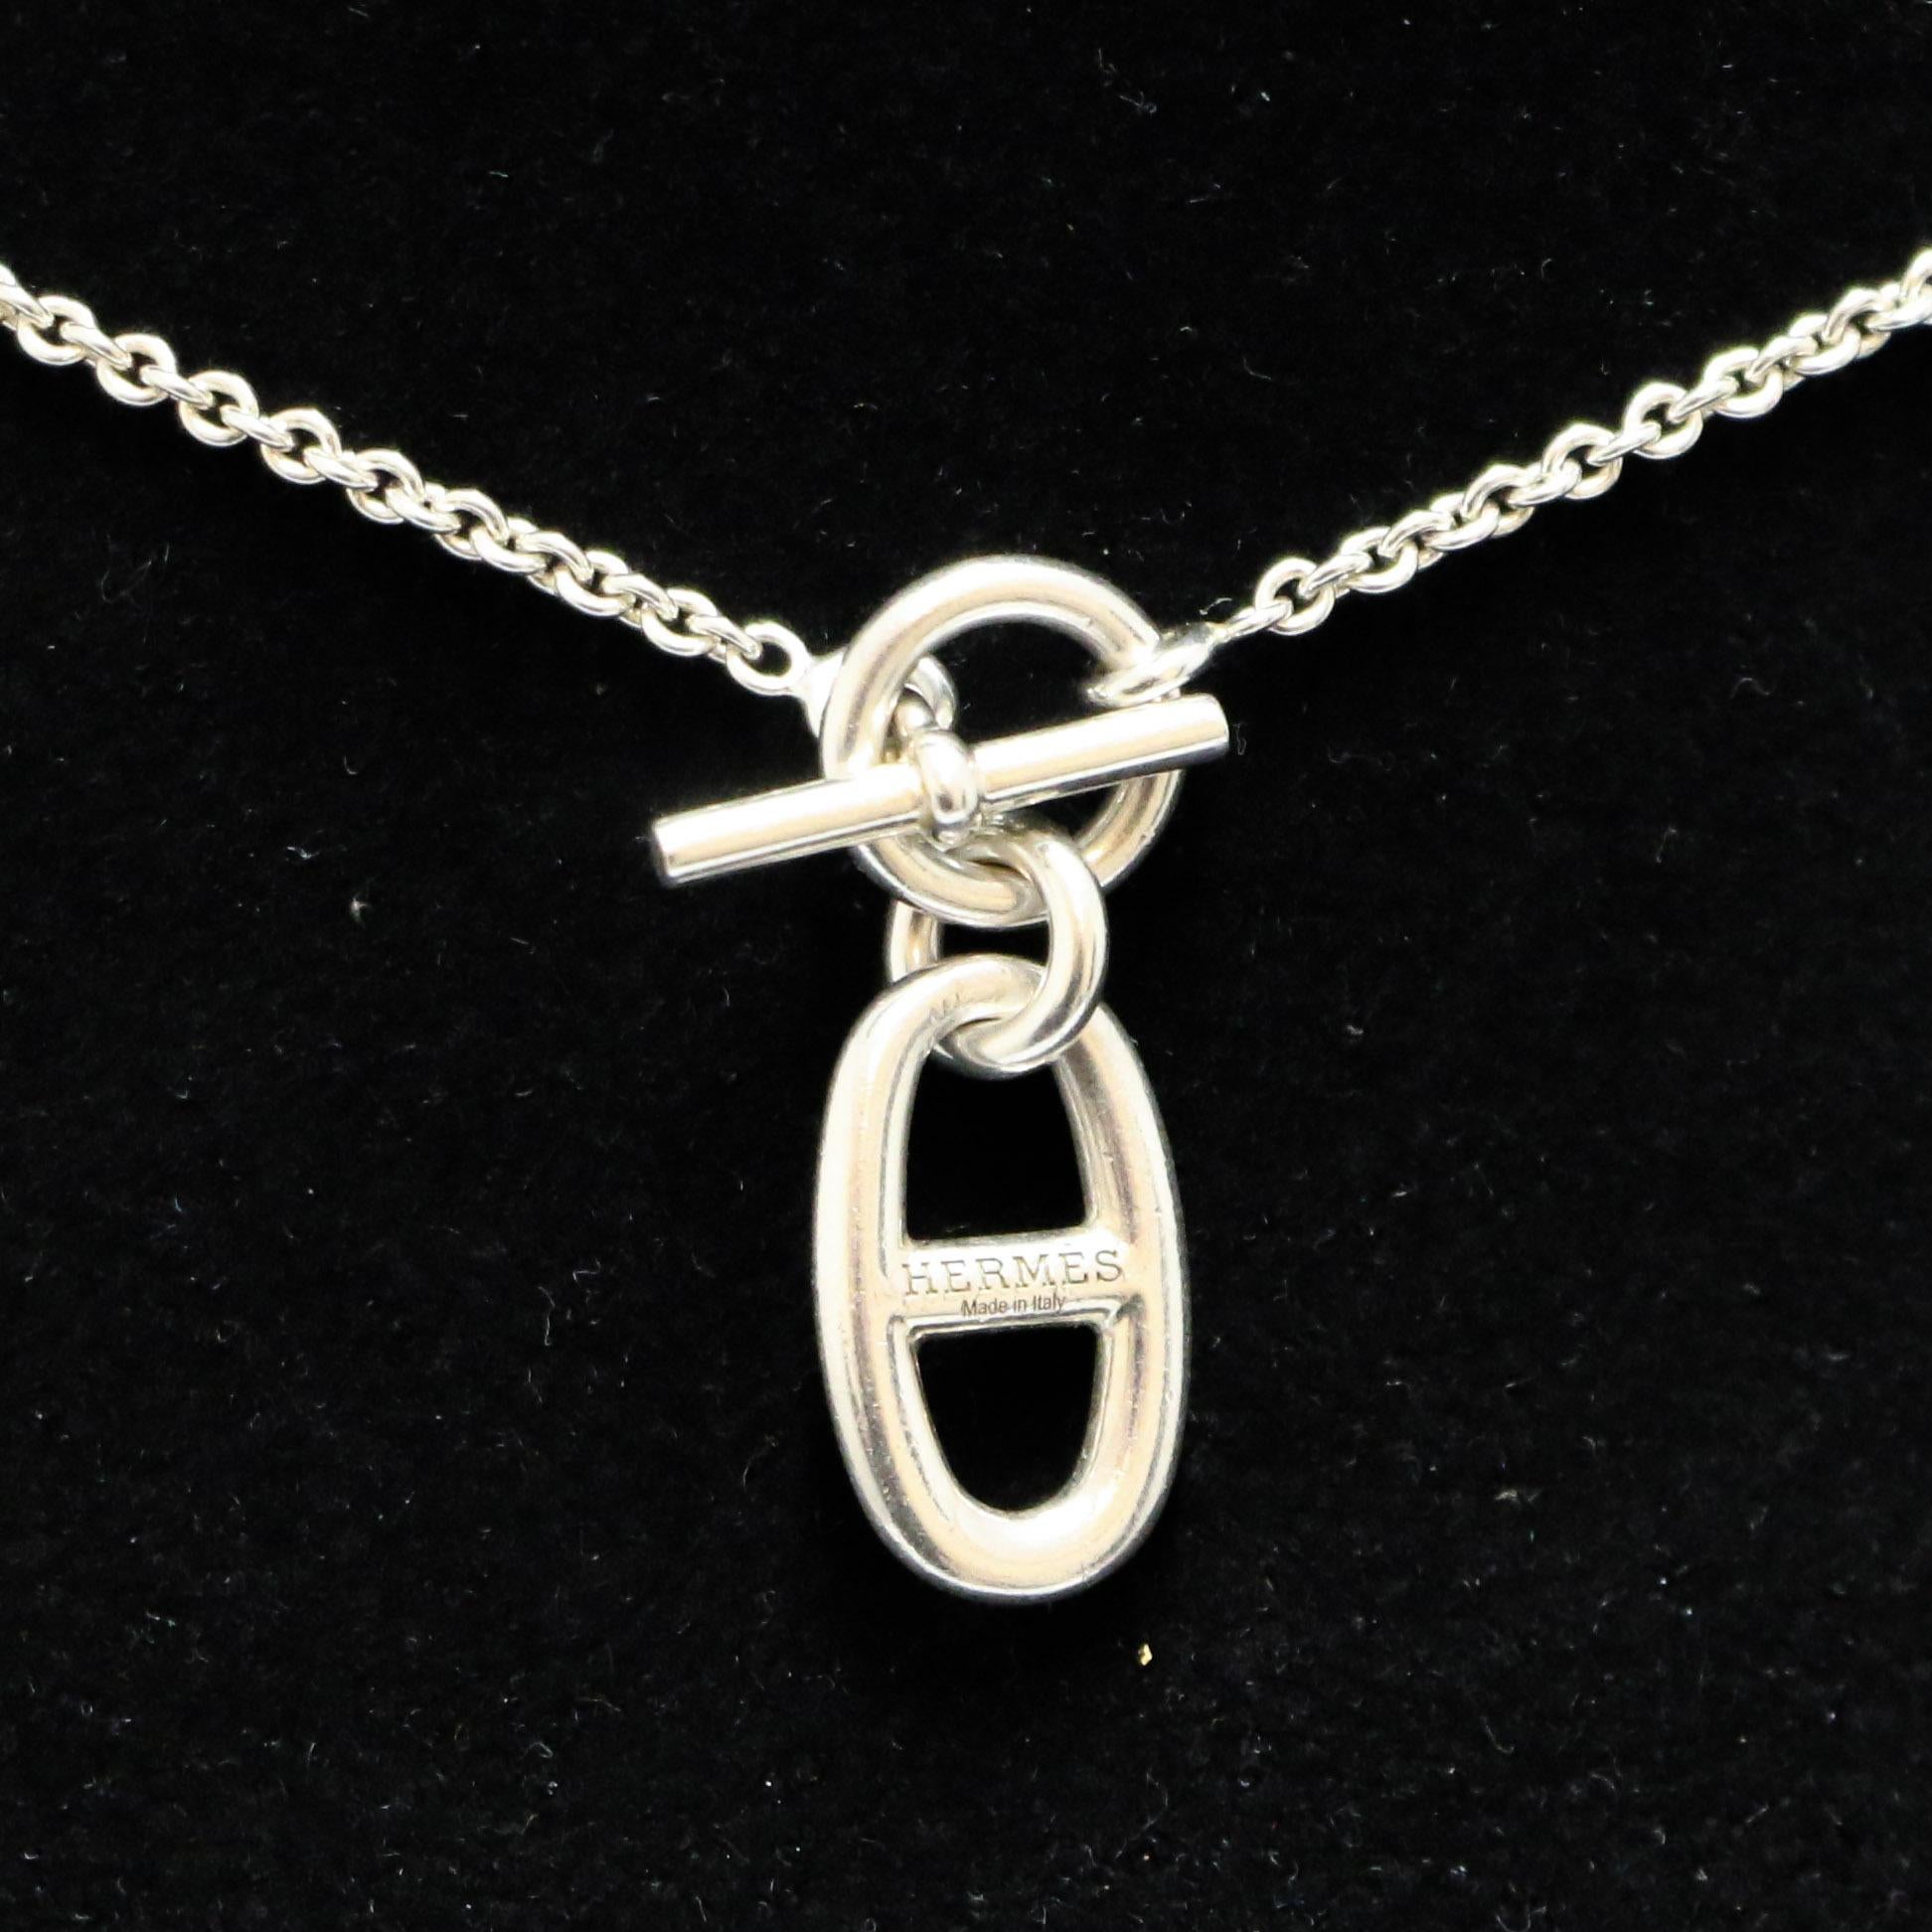 Iconic Necklace from Hermès with anchor chain pendant in silver
Condition : excellent
Made in Italy/France
Material : sterling silver 925/1000
Color : silver
Dimensions : chain length 40 cm, link pendant 1.9 x 1,10 cm
Stamp : yes
Details : signature